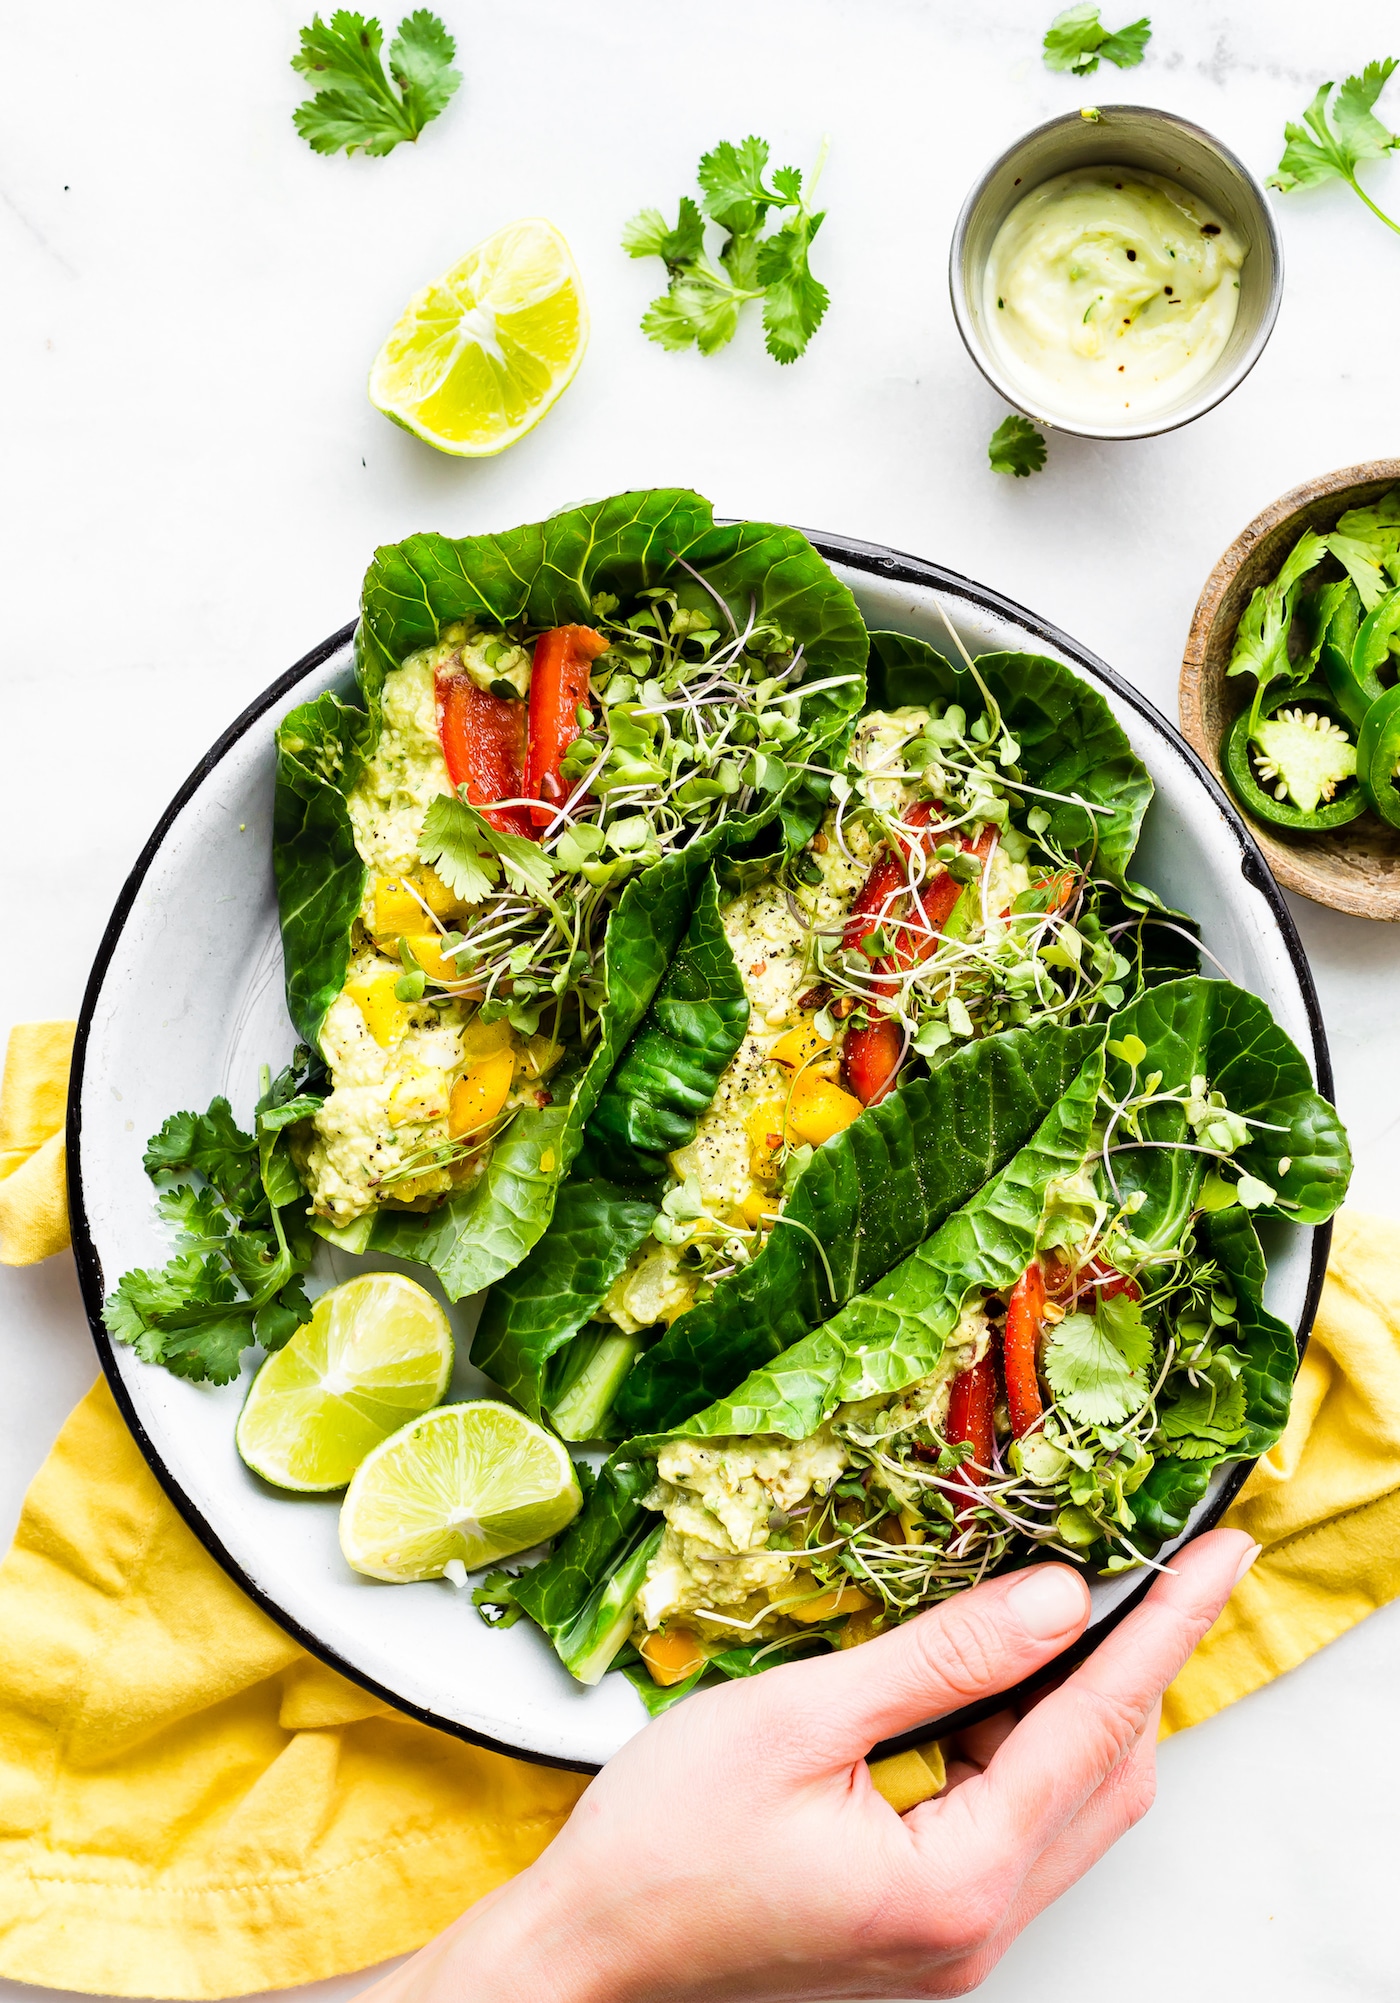 Spice up lunch with these Paleo MEXICAN AVOCADO EGG SALAD COLLARD GREEN WRAPS! A quick veggie packed lunch!